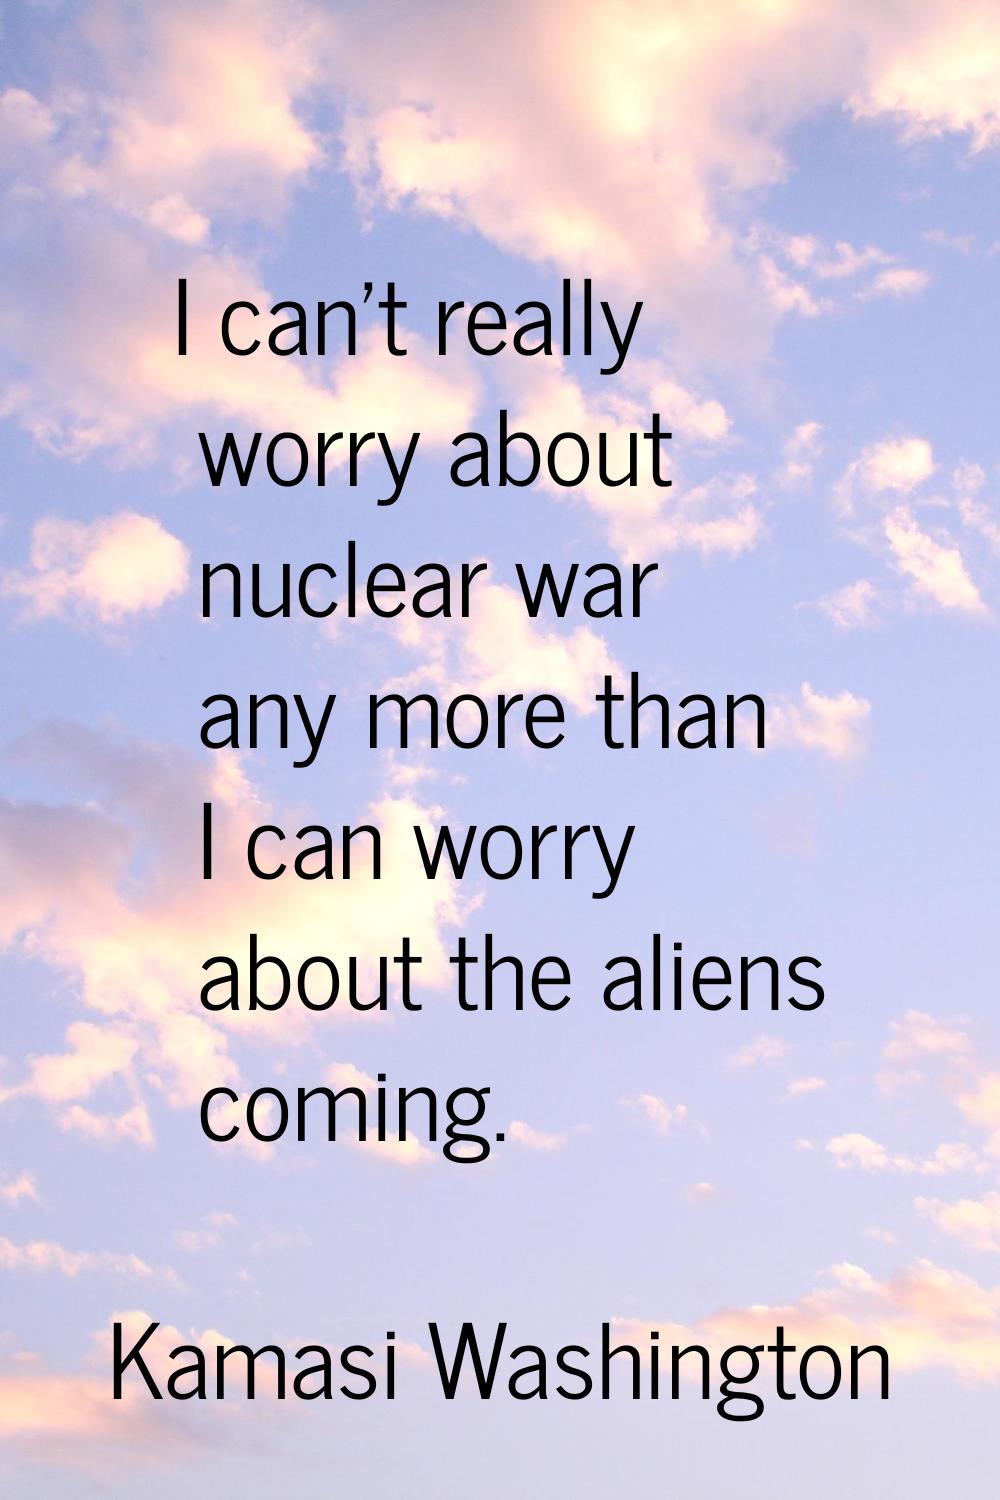 I can't really worry about nuclear war any more than I can worry about the aliens coming.